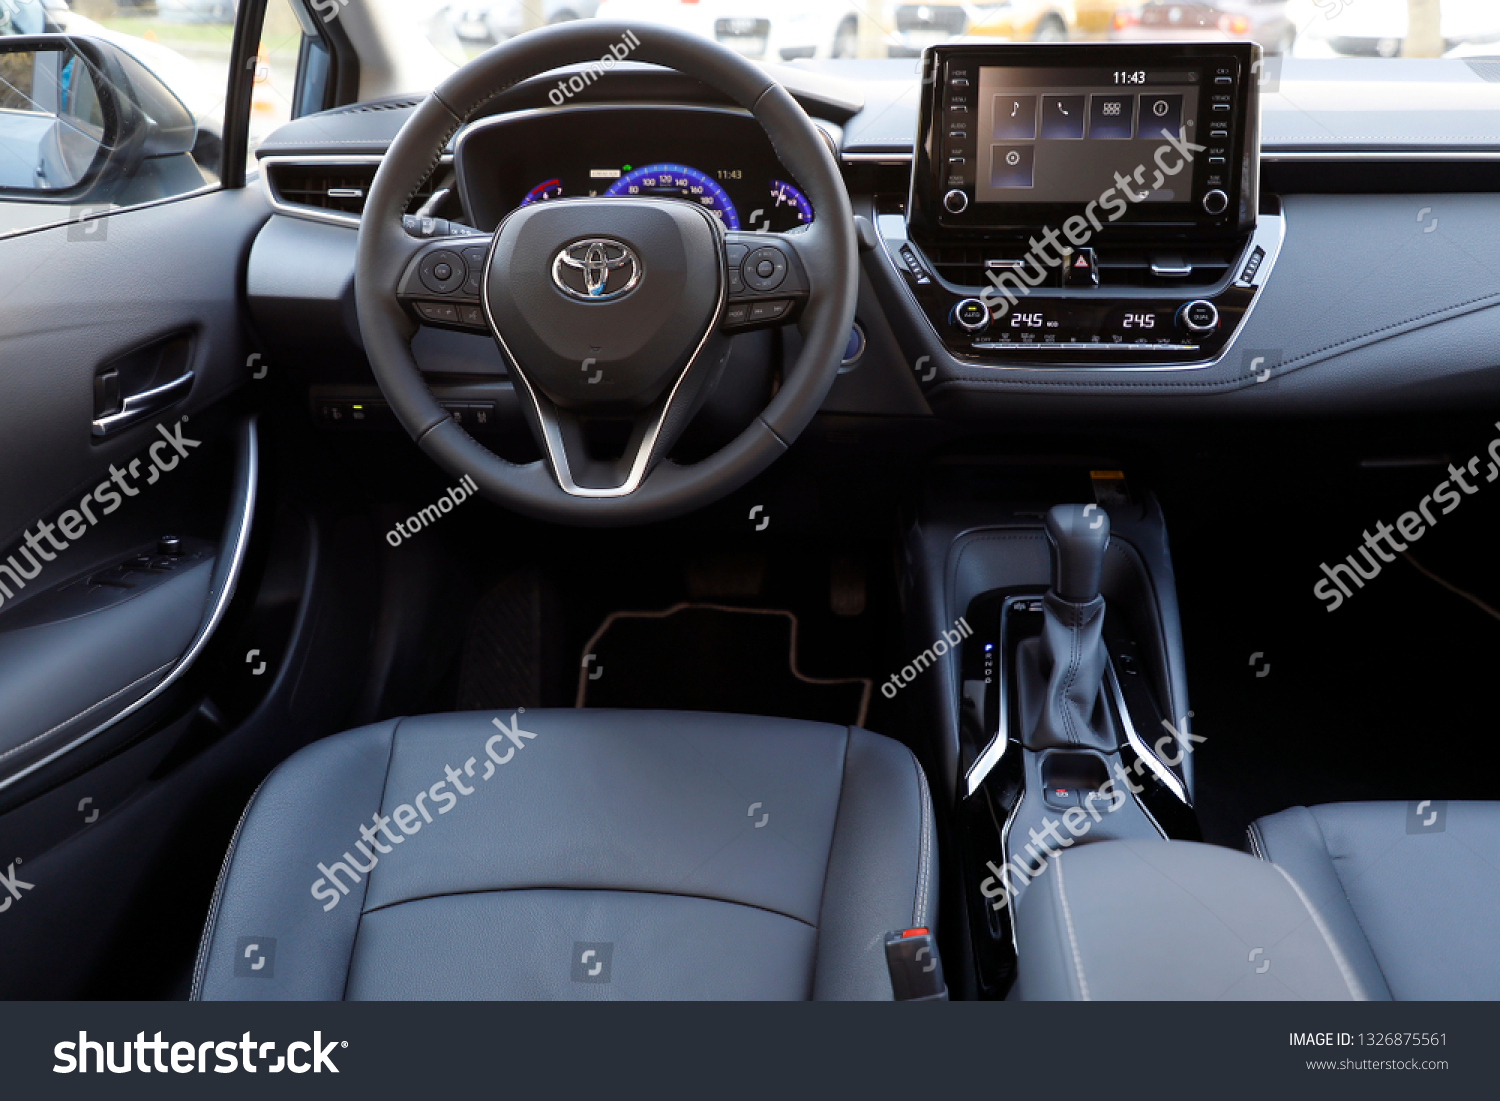 Istanbul March 01 2019 Toyota Corolla Stock Photo Edit Now 1326875561